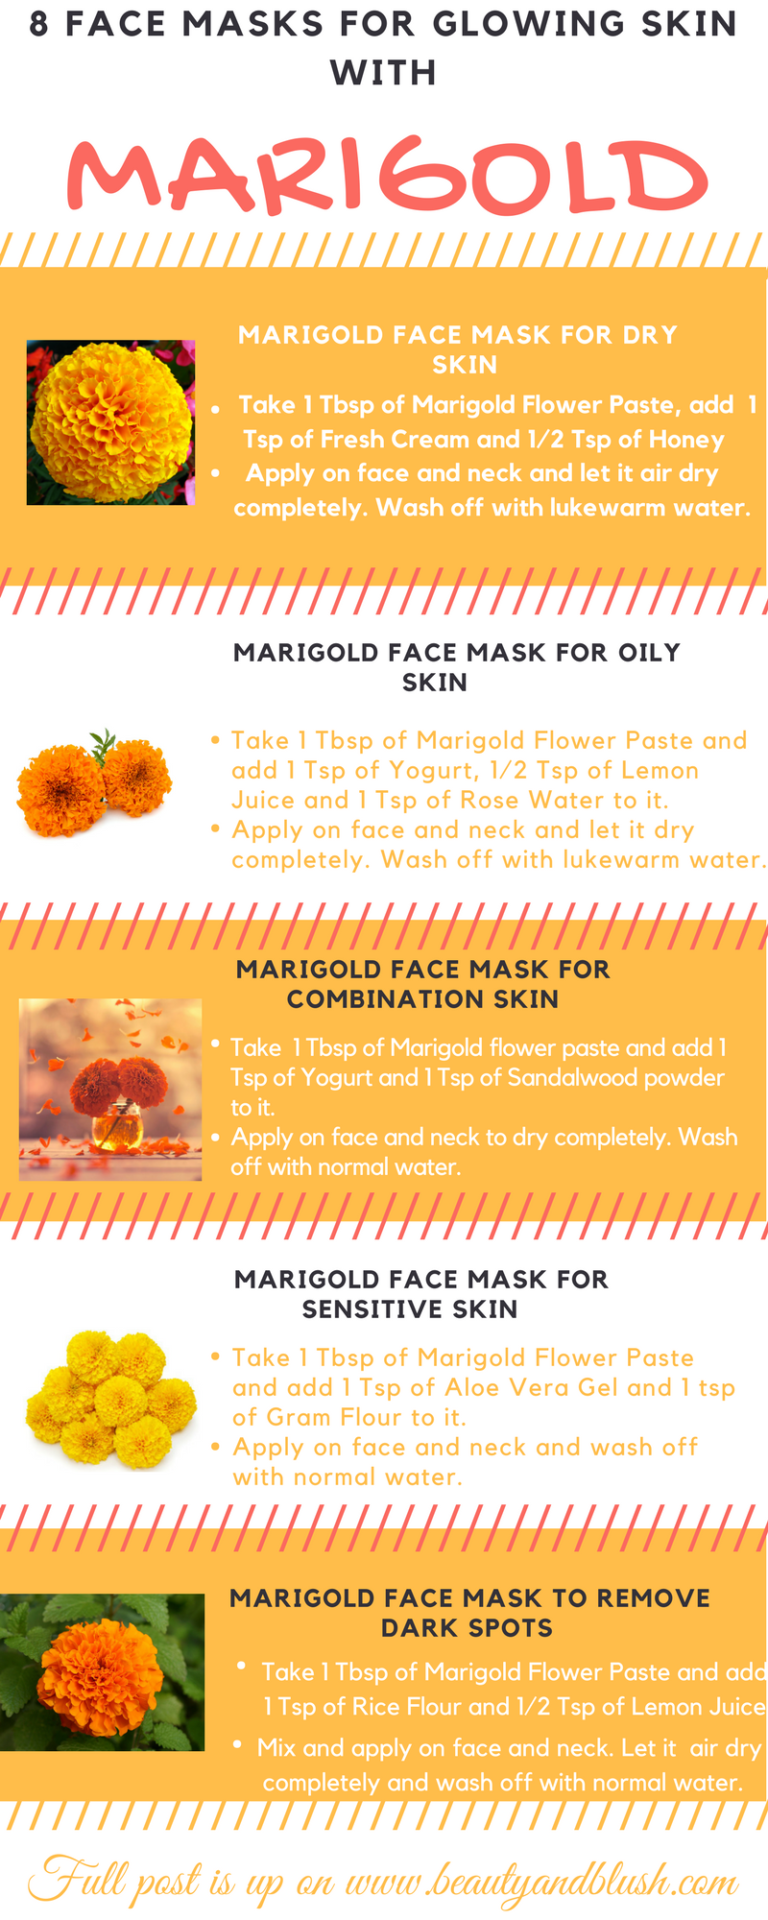 8 Marigold Face Masks for Glowing and Beautiful Skin - Beauty and Blush -   17 beauty Skin mask ideas